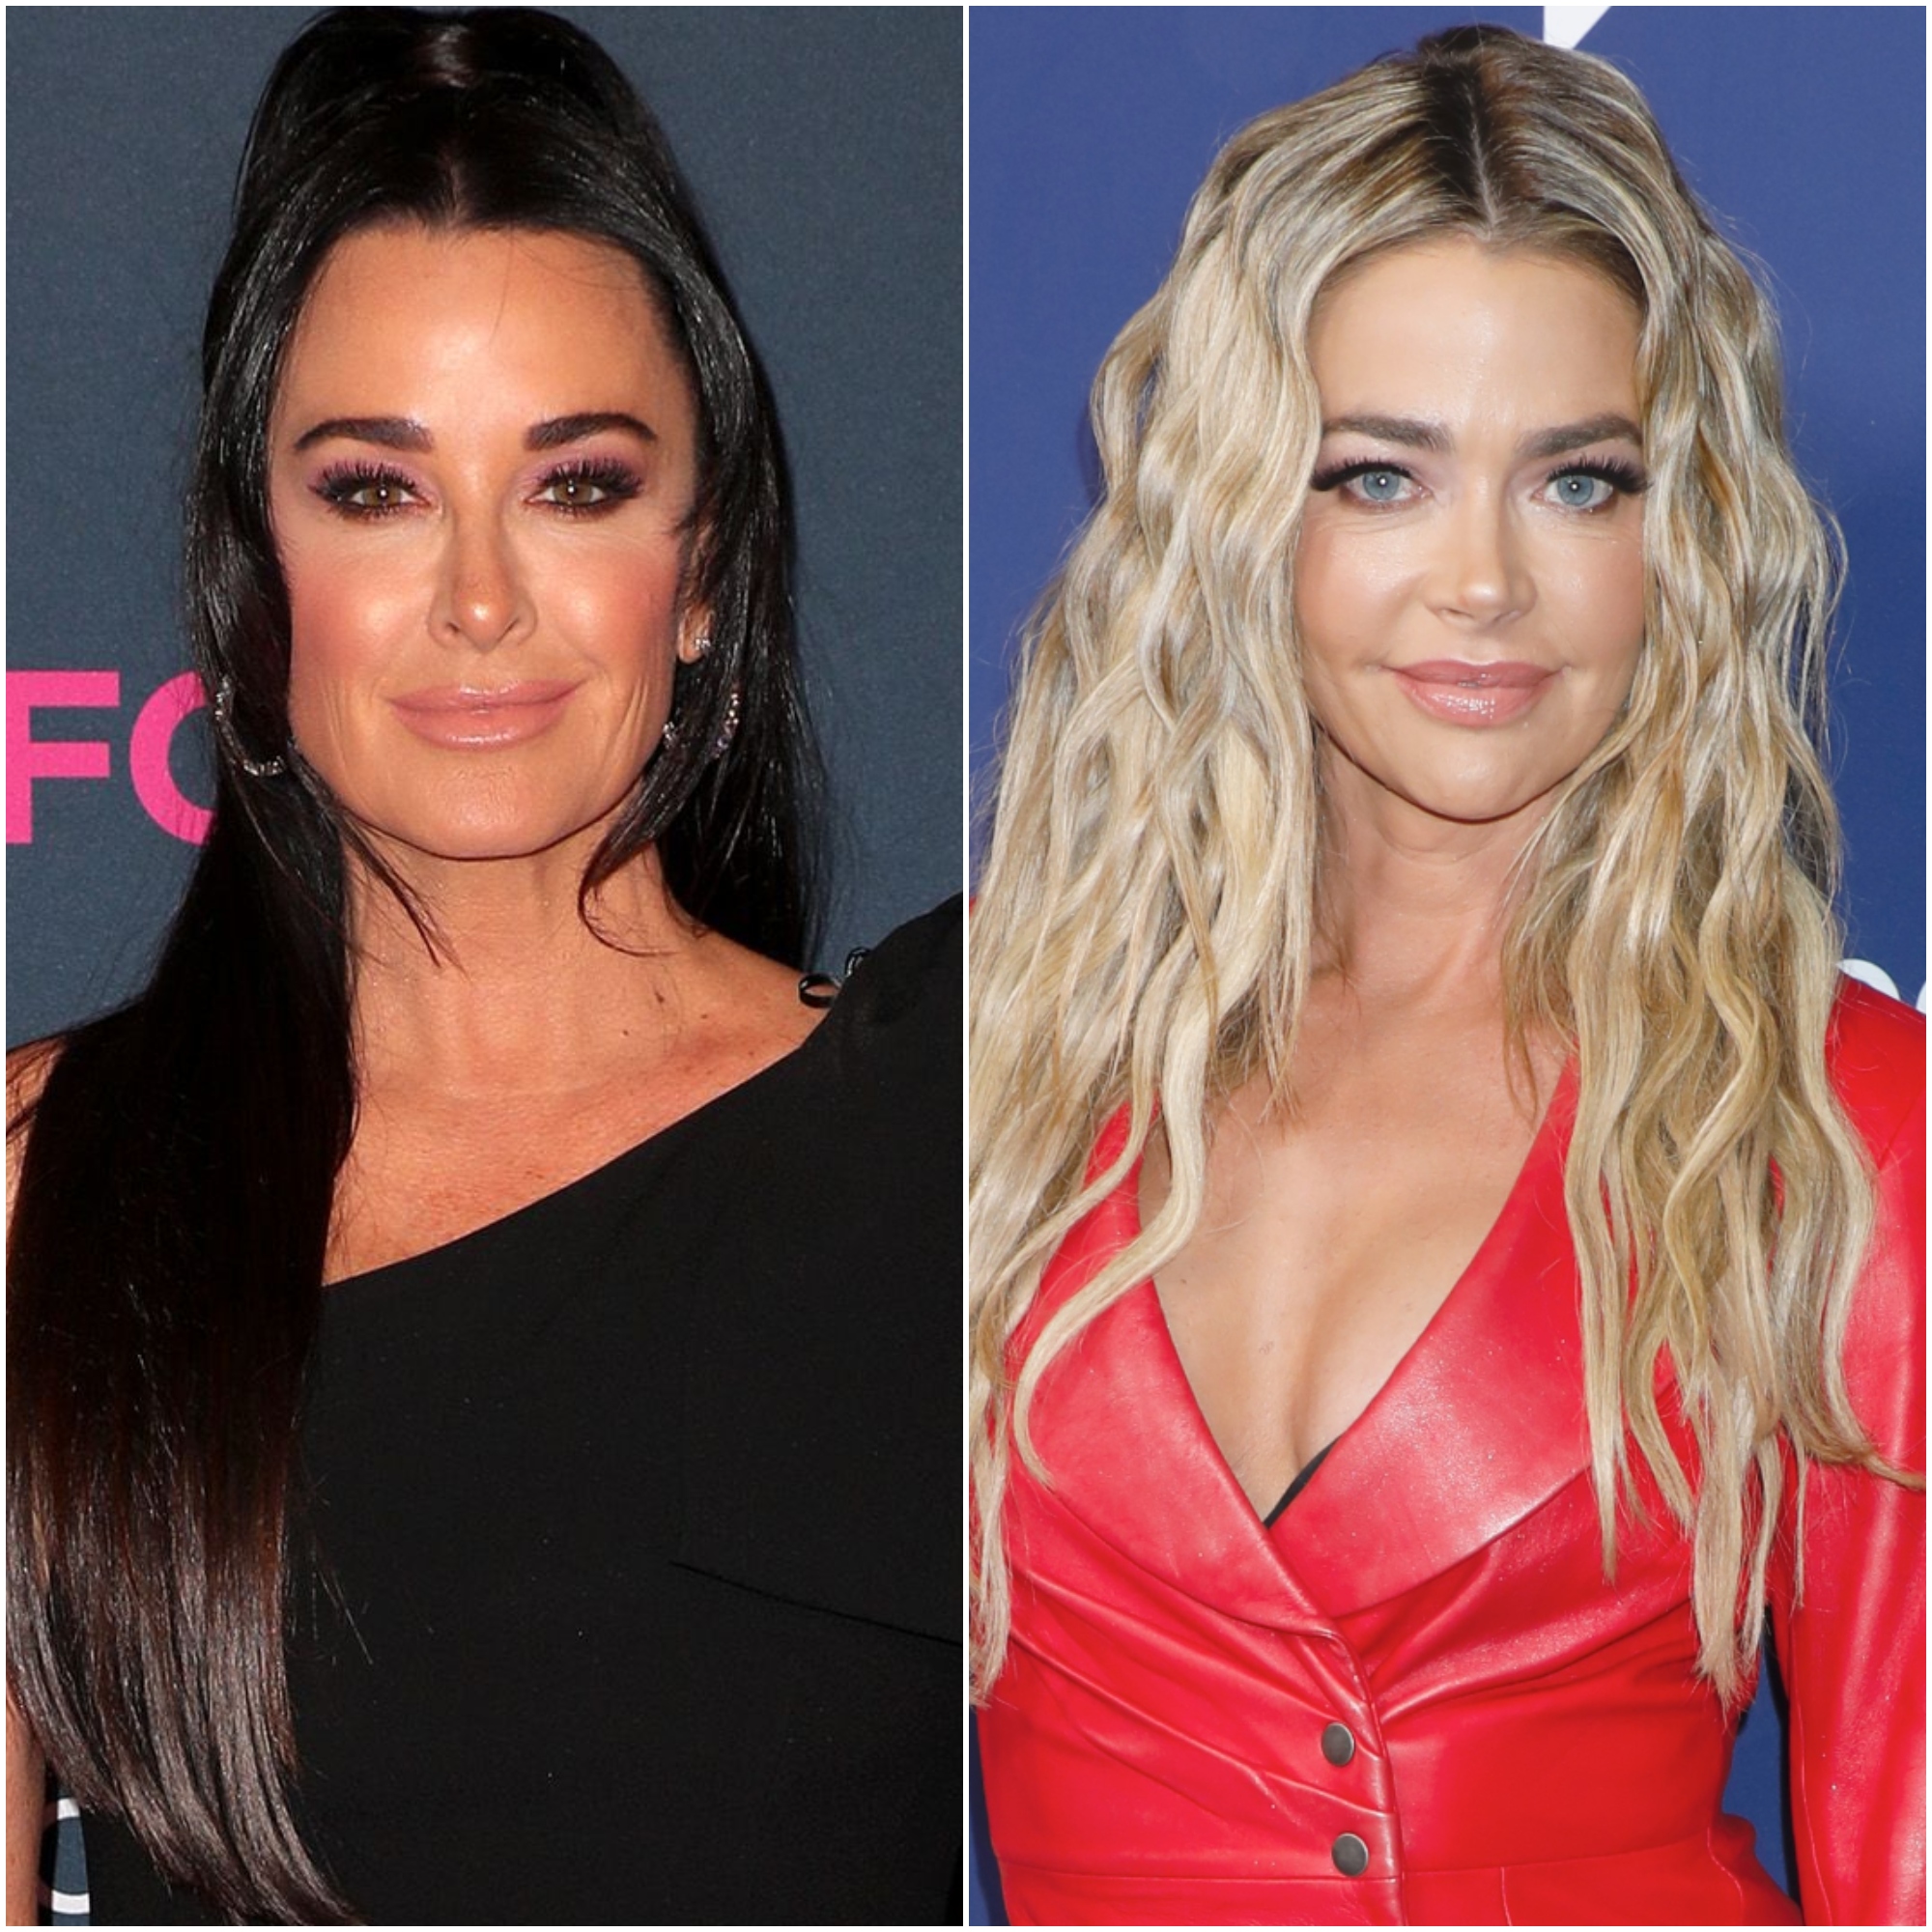 Kyle Richards Claps Back About Cutting Denise Richards Out of New